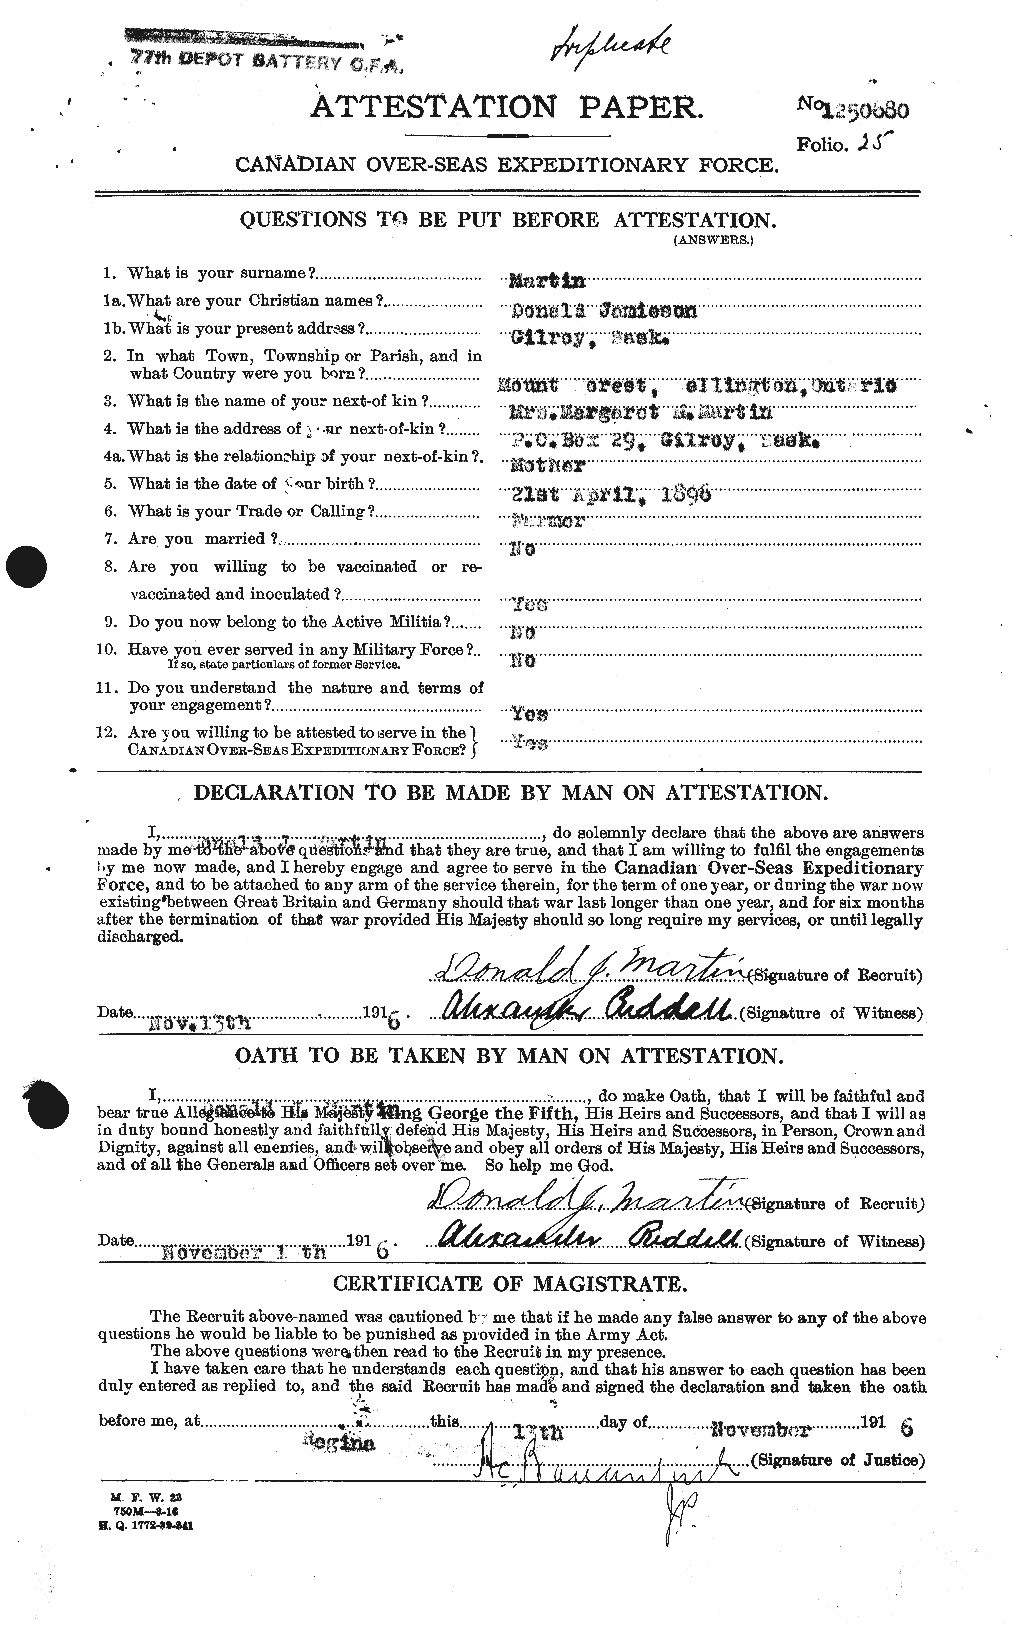 Personnel Records of the First World War - CEF 482828a